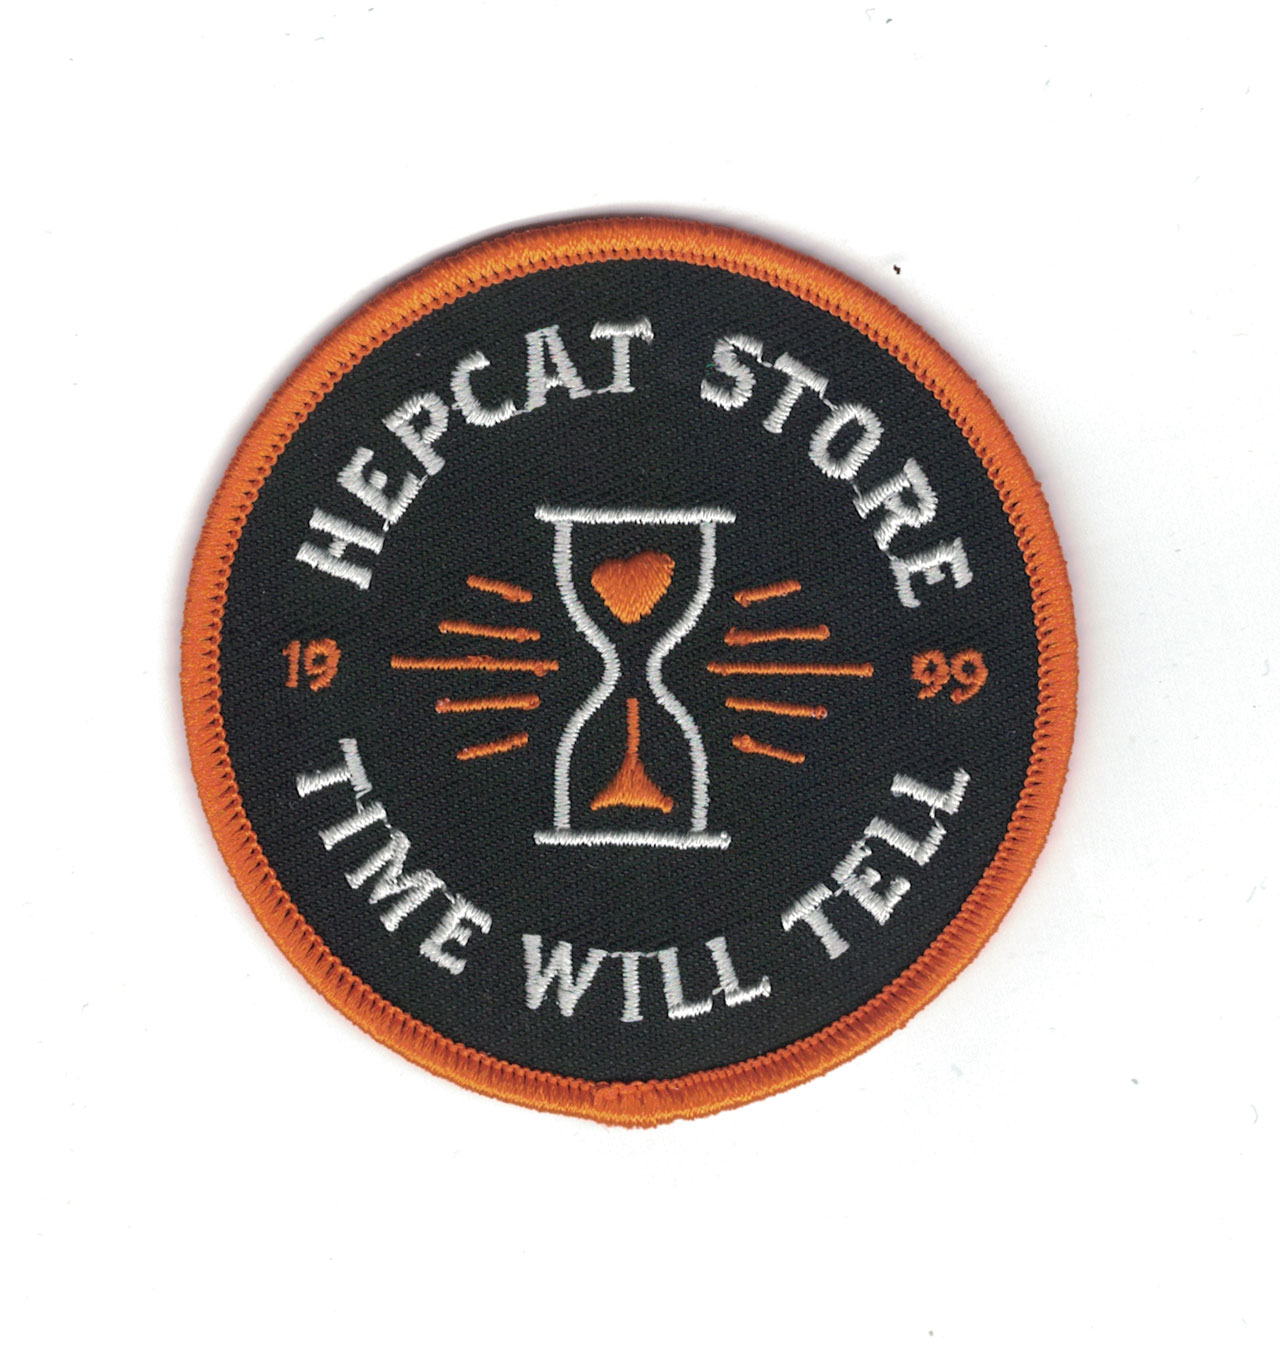 HepCat---Time-Will-tell-patch-Black-12